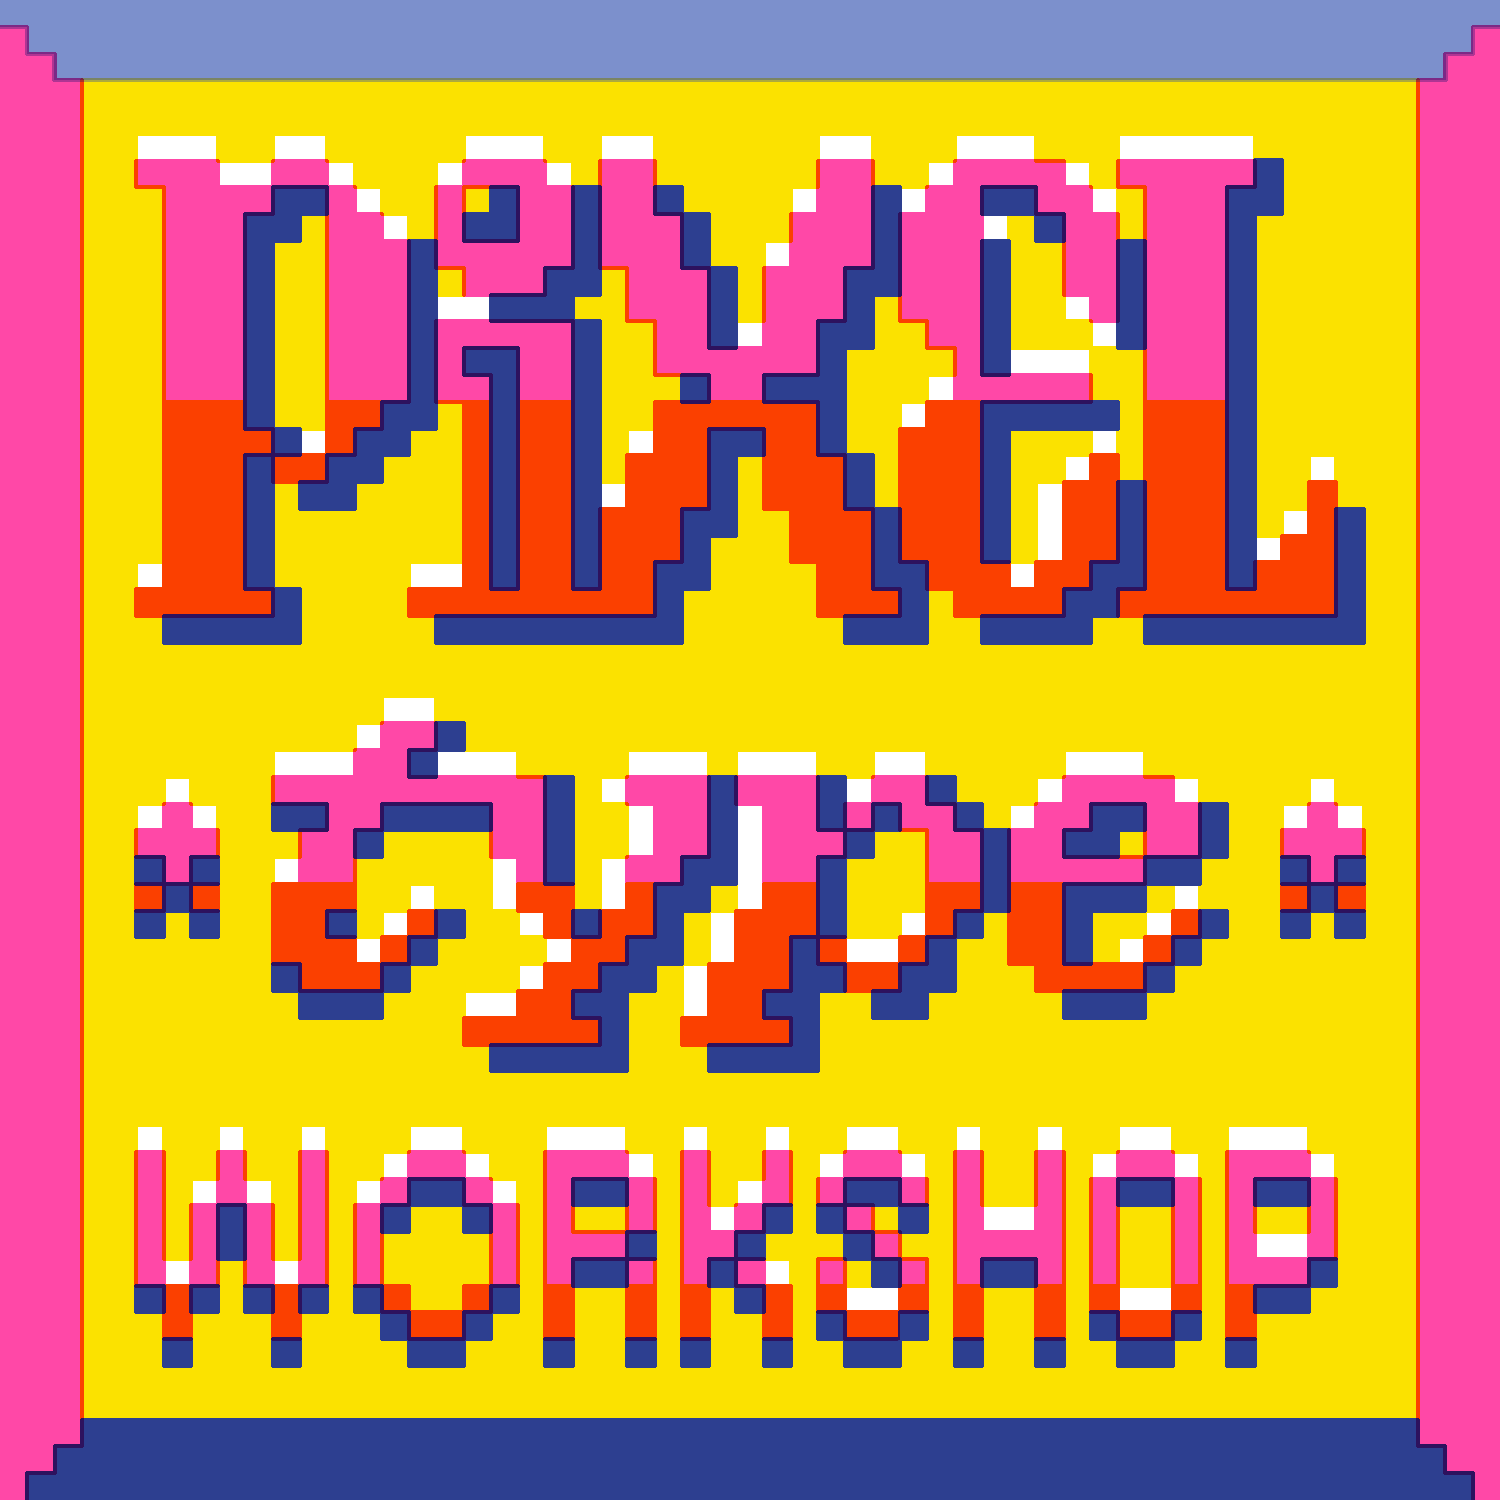 colorful pixelized type on yellow background that says "pixel type workshop". Each are bright pink with blue shadows.